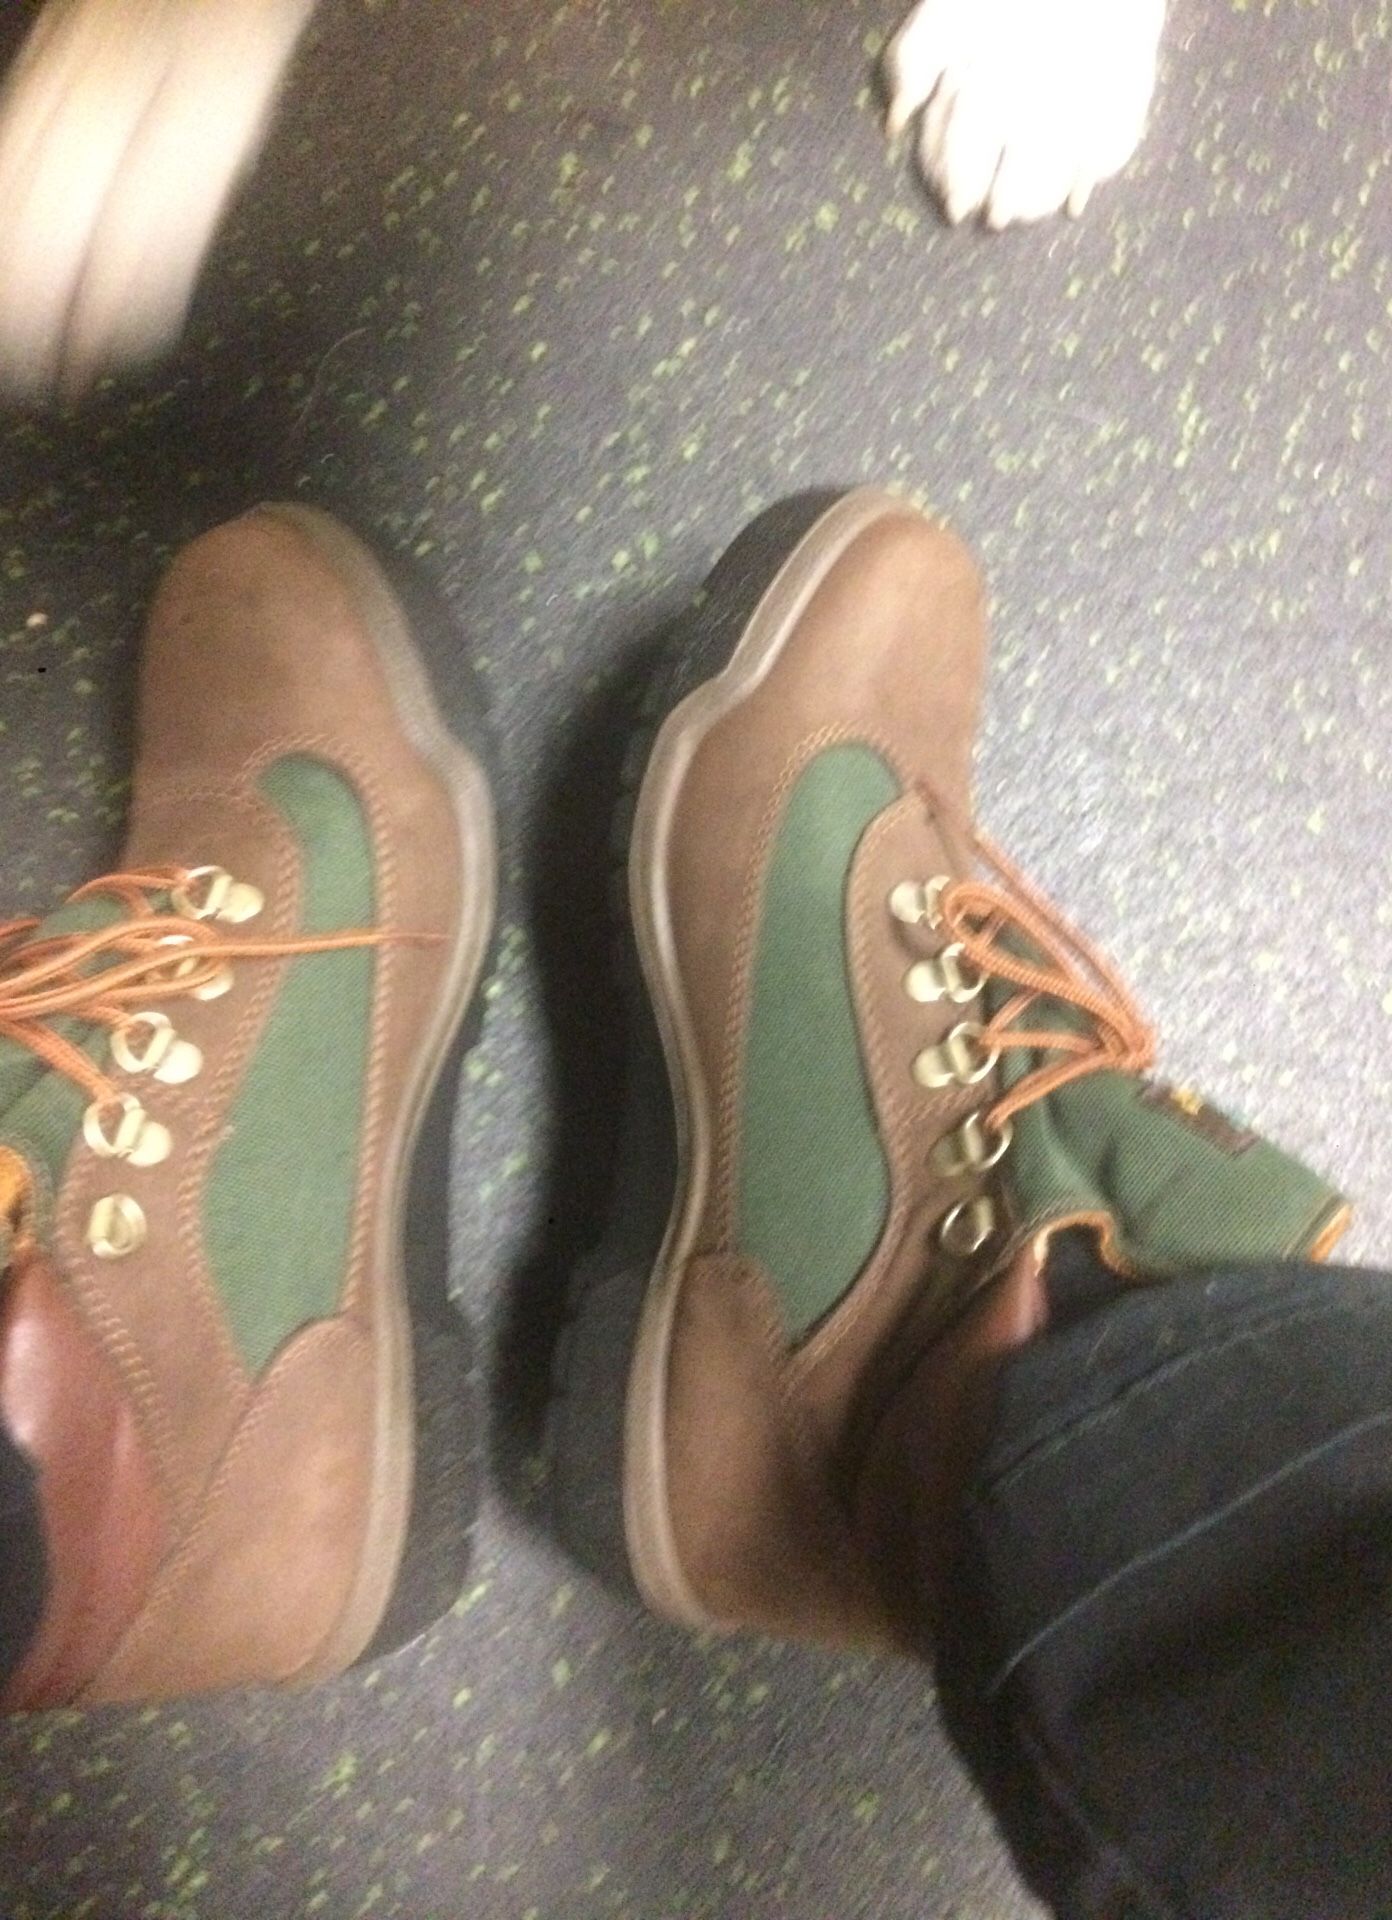 Beef and broccoli timberland field boots size 7